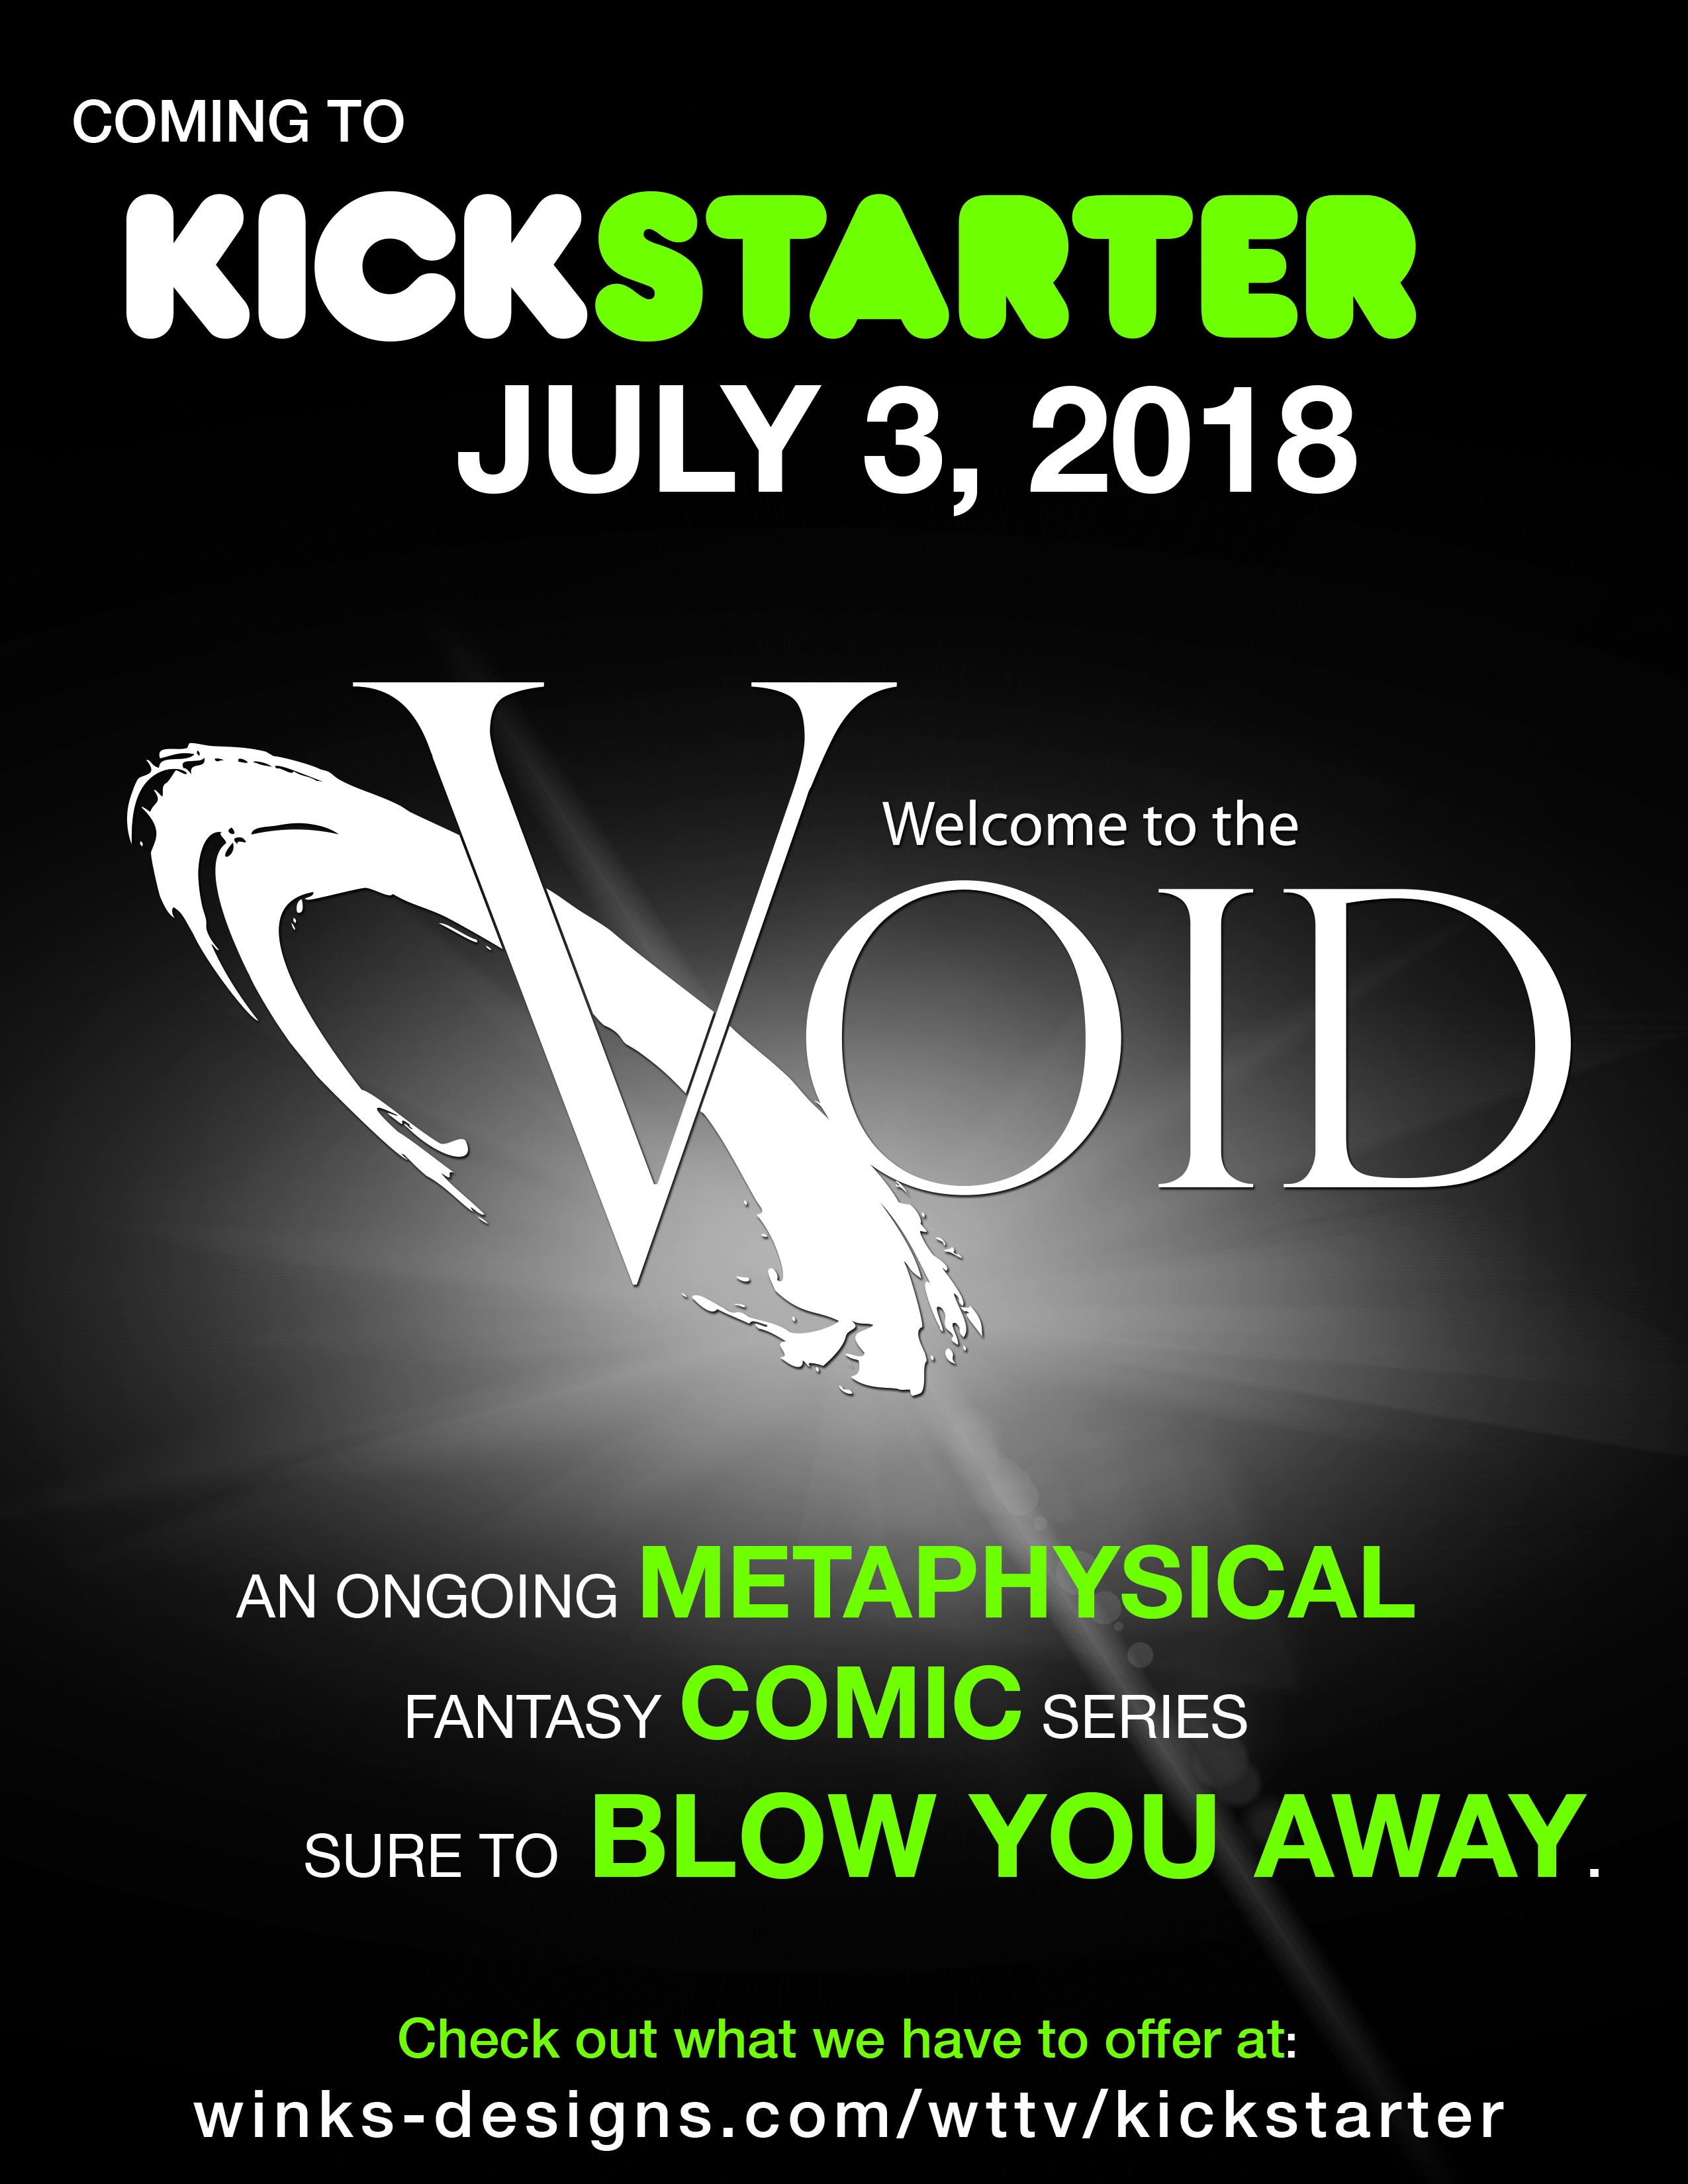 Welcome to the Void is coming to Kickstarter July 3rd.